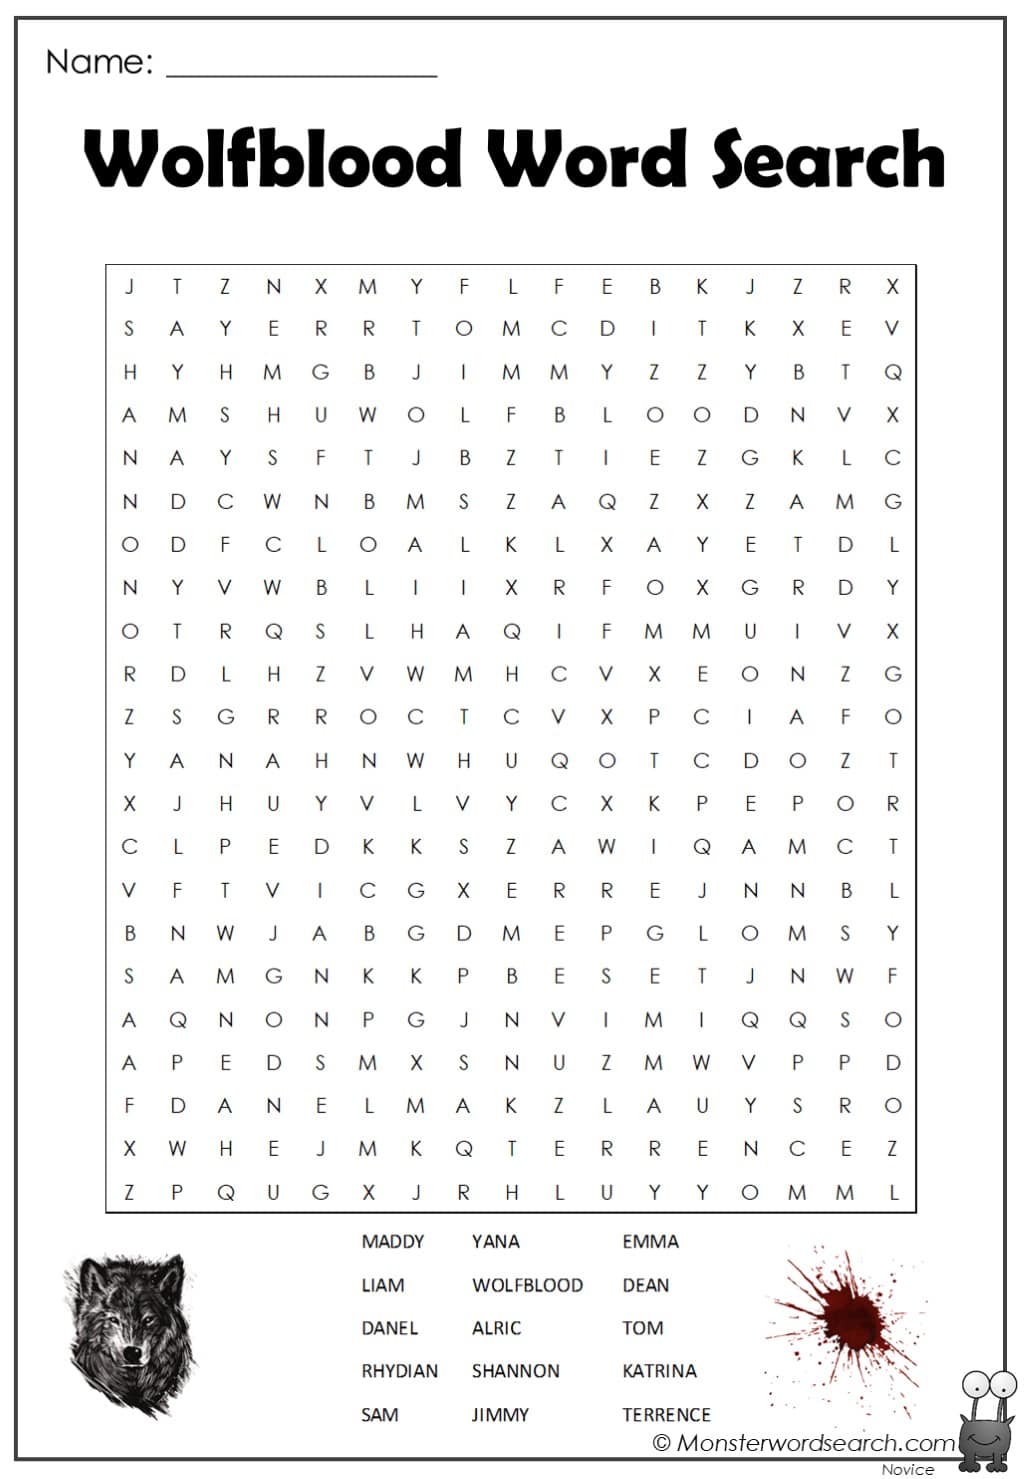 Wolfblood Word Search